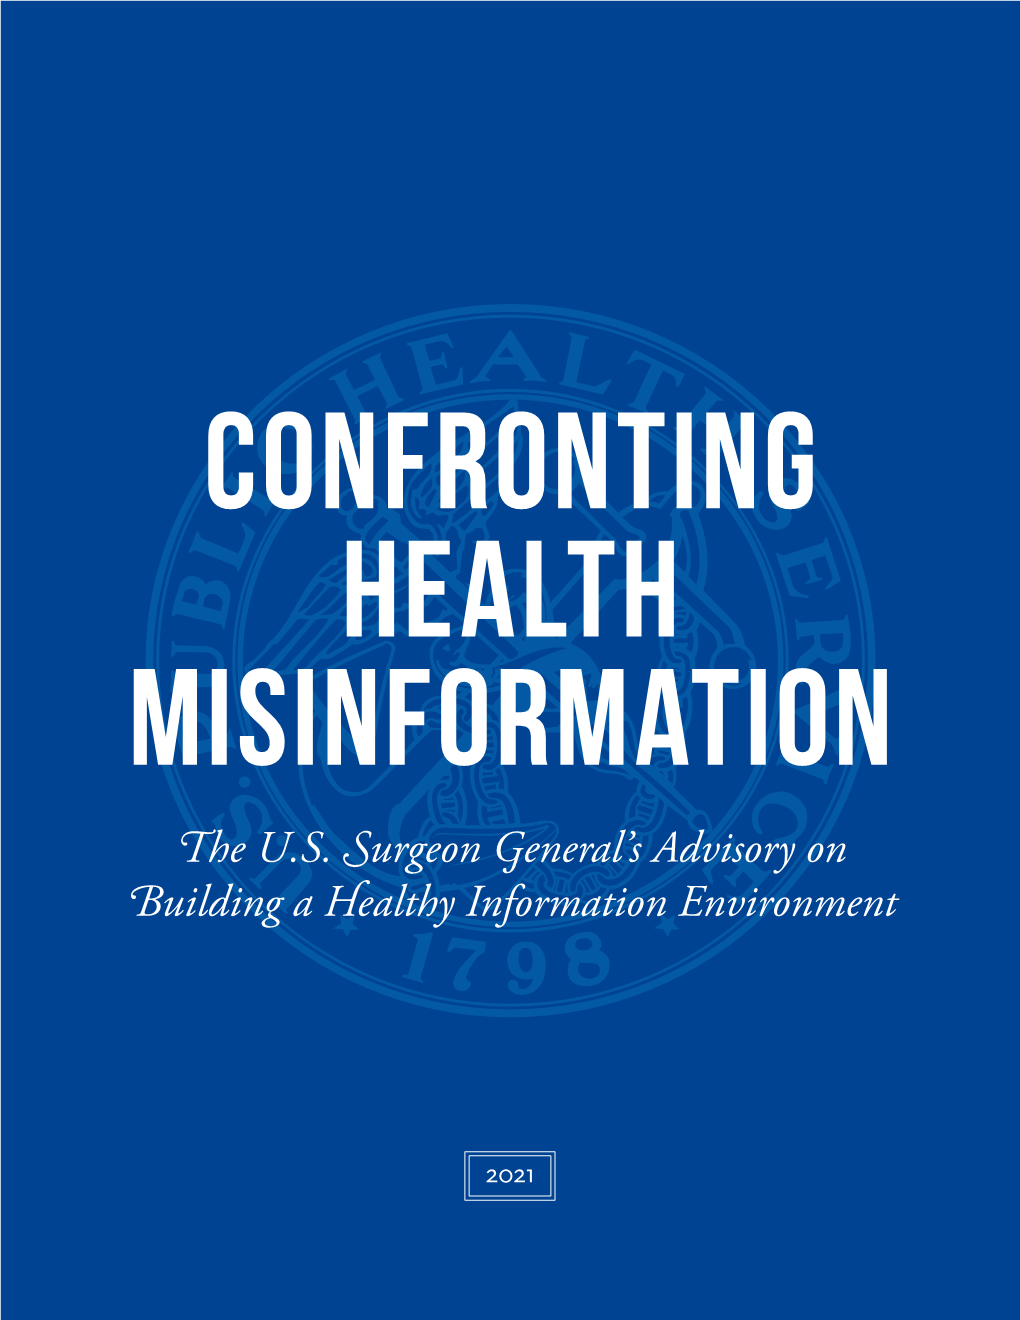 Surgeon General's Advisory on Confronting Health Misinformation